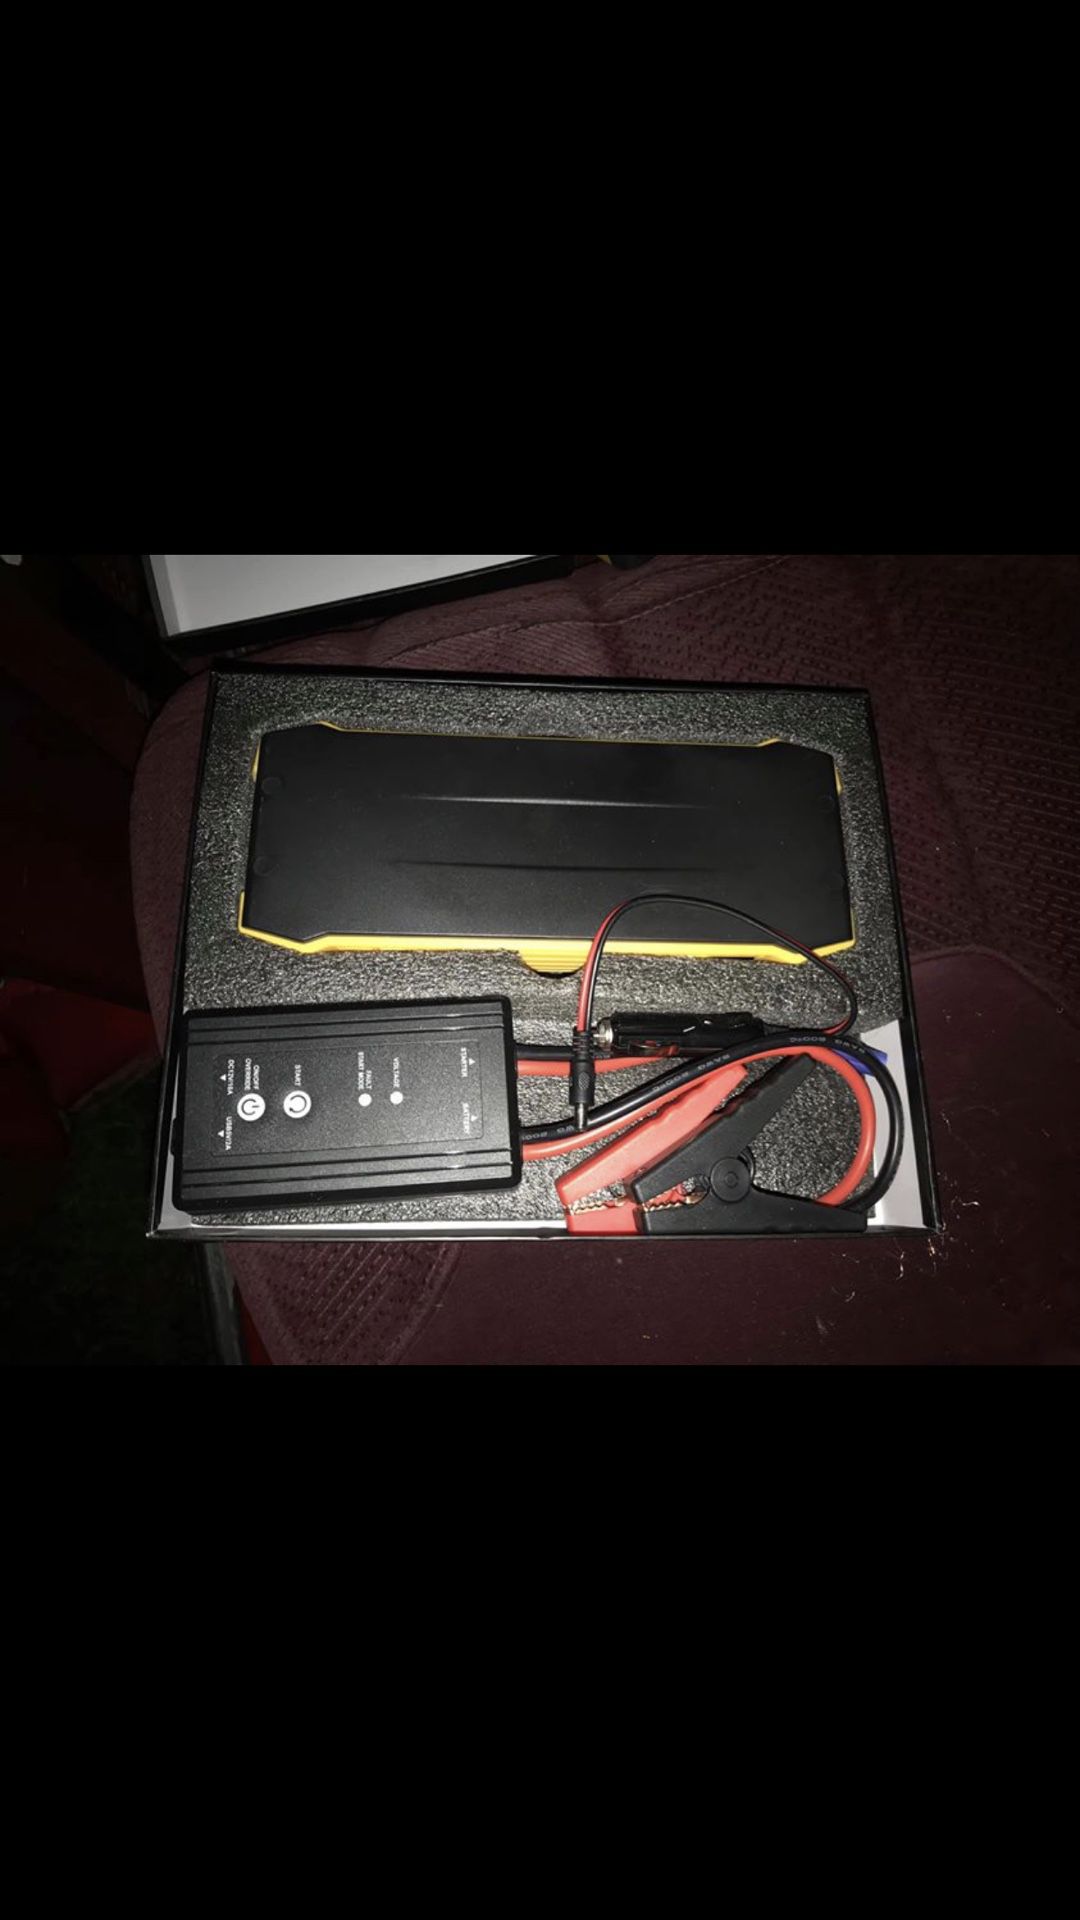 Autowit 12V Portable Batteryless Car Jump Starter Supercap Booster Pack 700A Peak /600A Instant (New) $100 OBO Retail $130